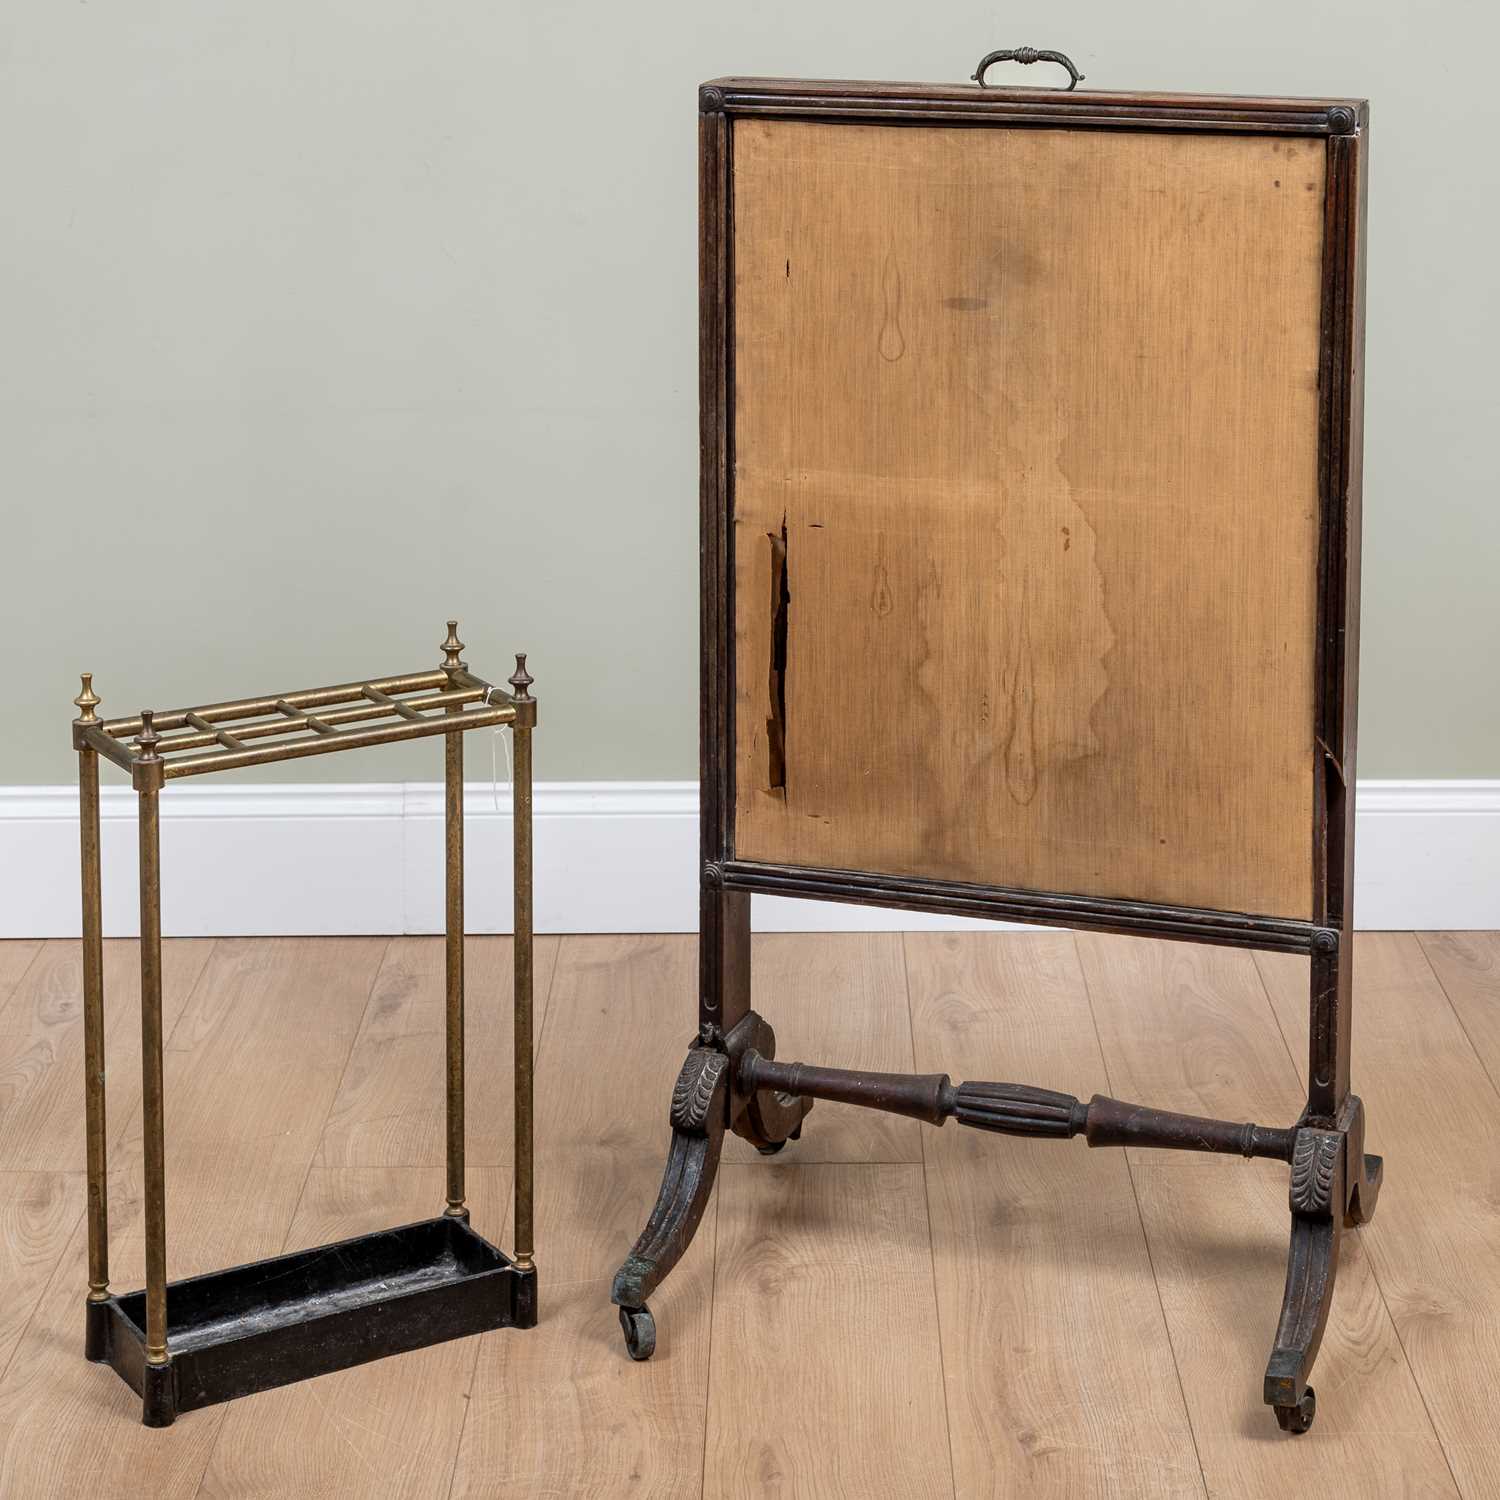 A 19th century brass and cast iron stick stand, 35cm wide x 58cm high; together with a 19th